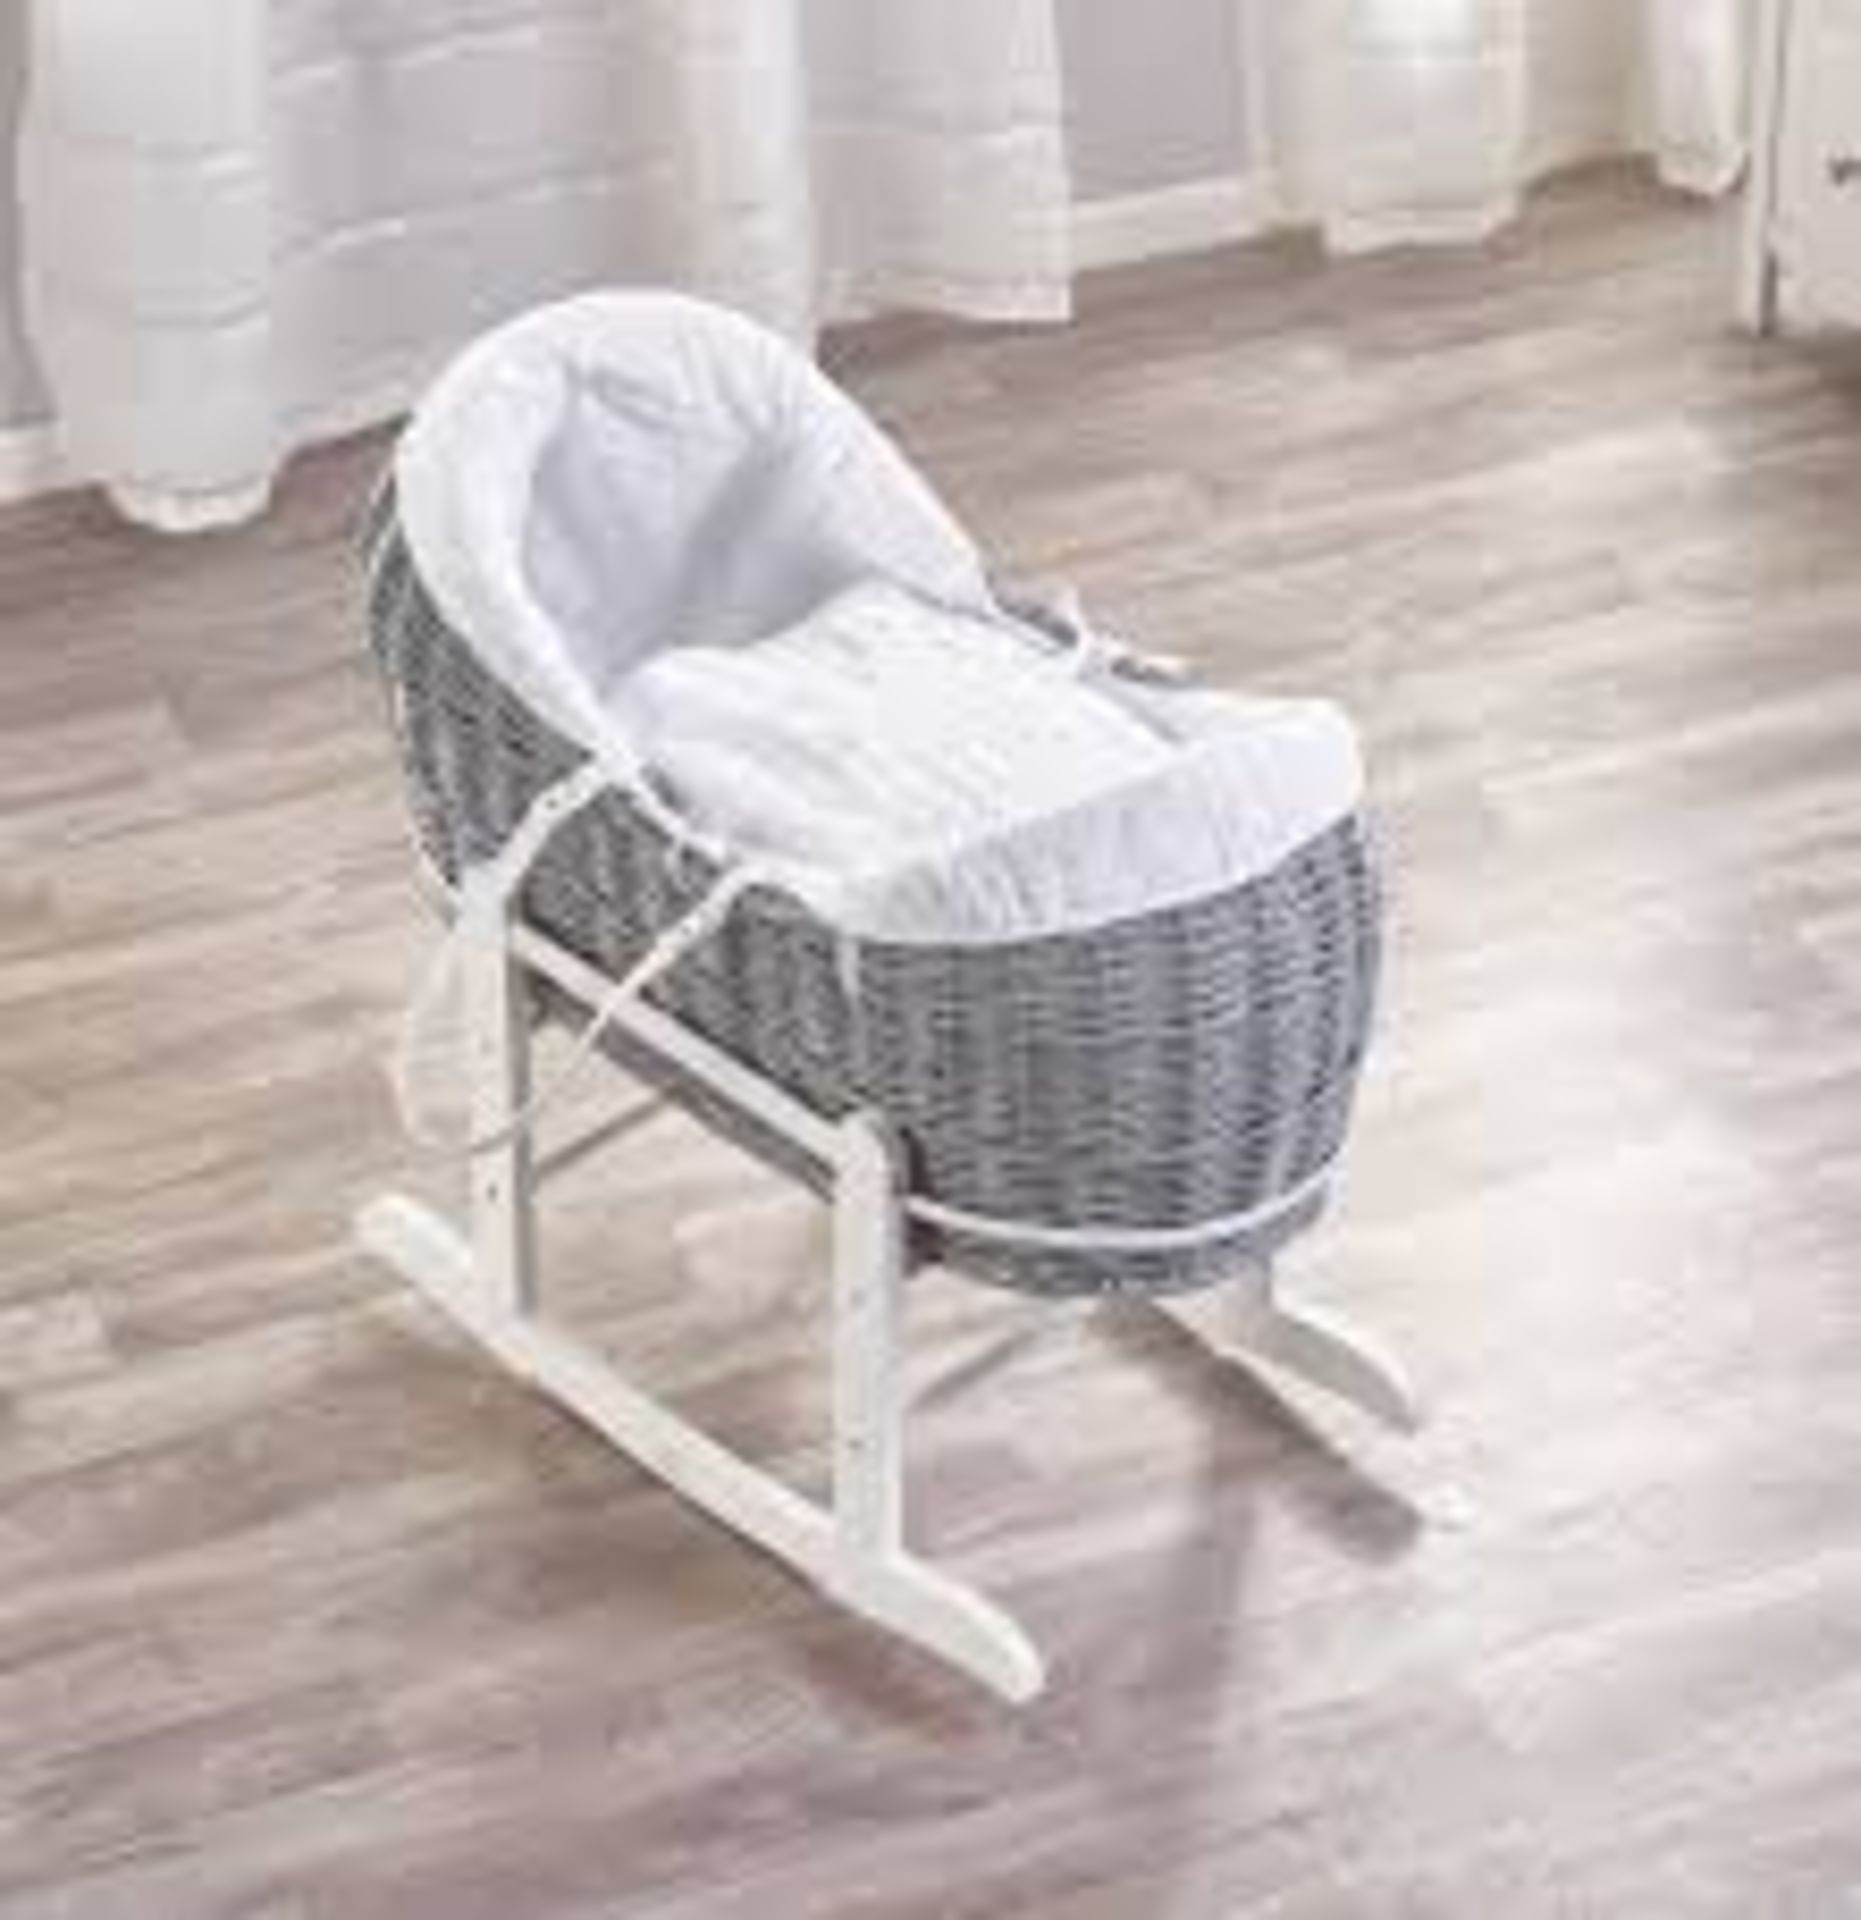 Boxed Nolan Rocking Moses Basket With Stand RRP £80 (19162) (Pictures For Illustration Purposes